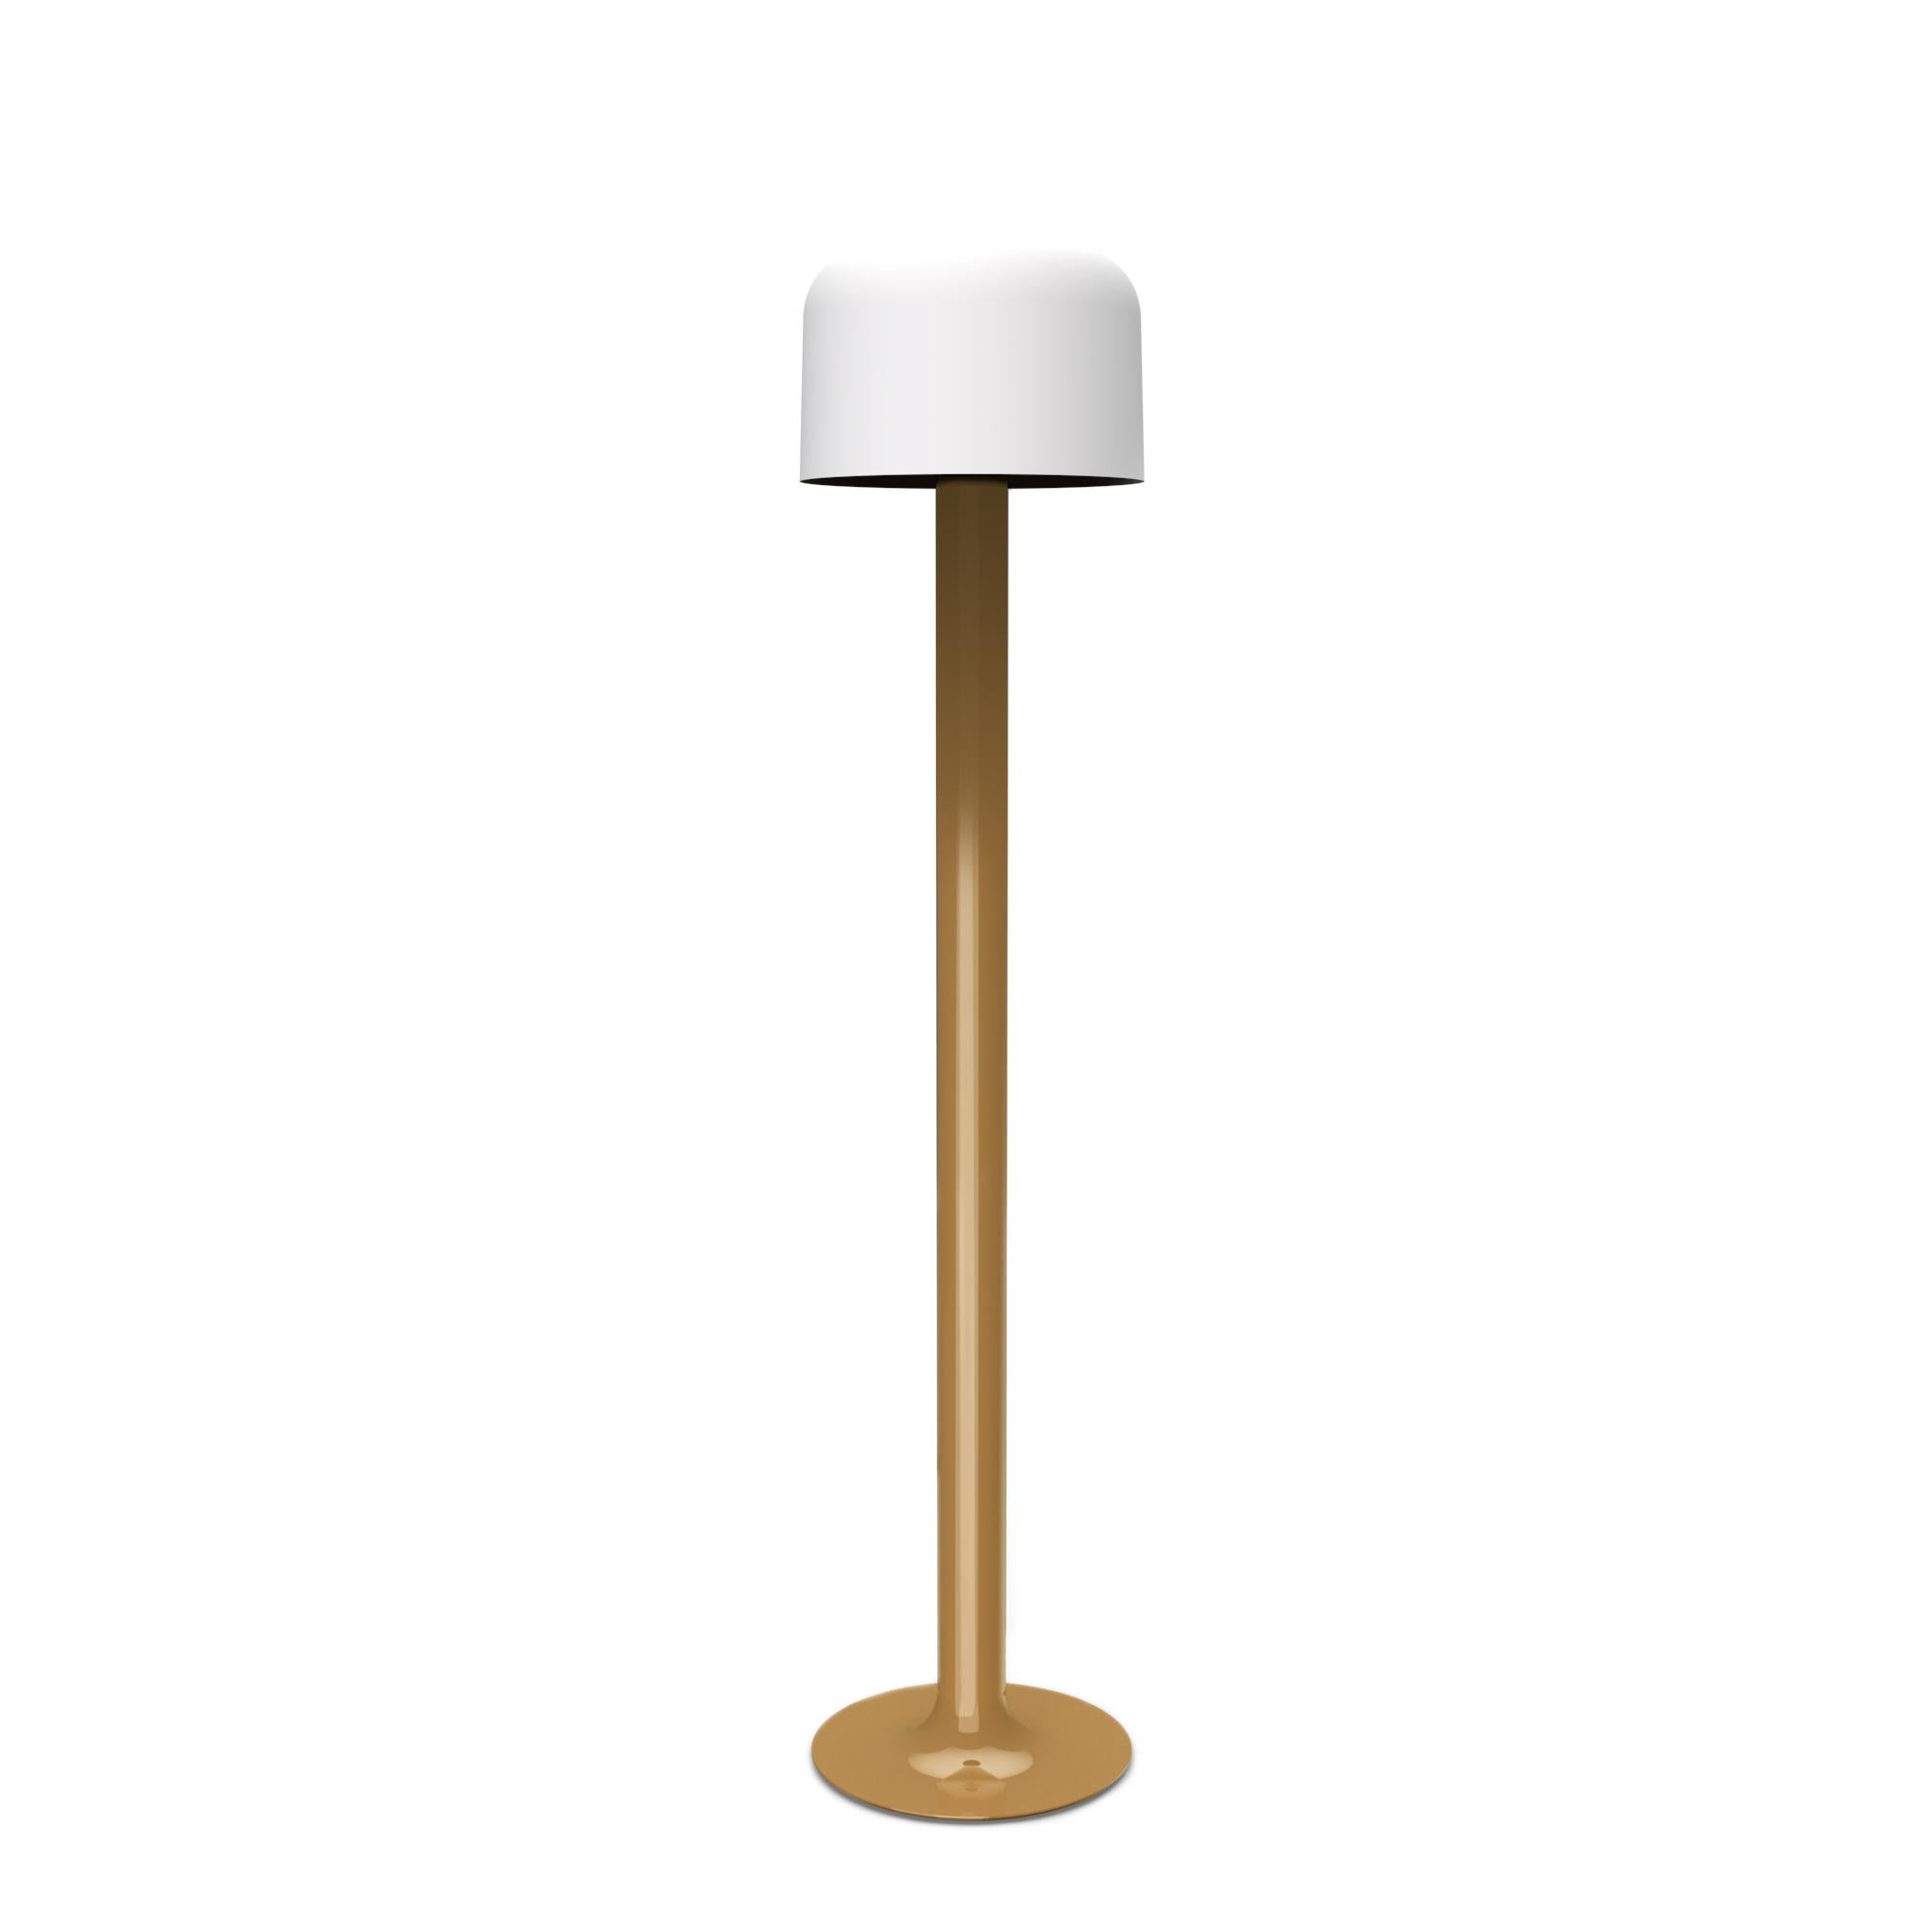 Michel Mortier 10527 Metal and Glass Floor Lamp for Disderot in White In New Condition For Sale In Glendale, CA